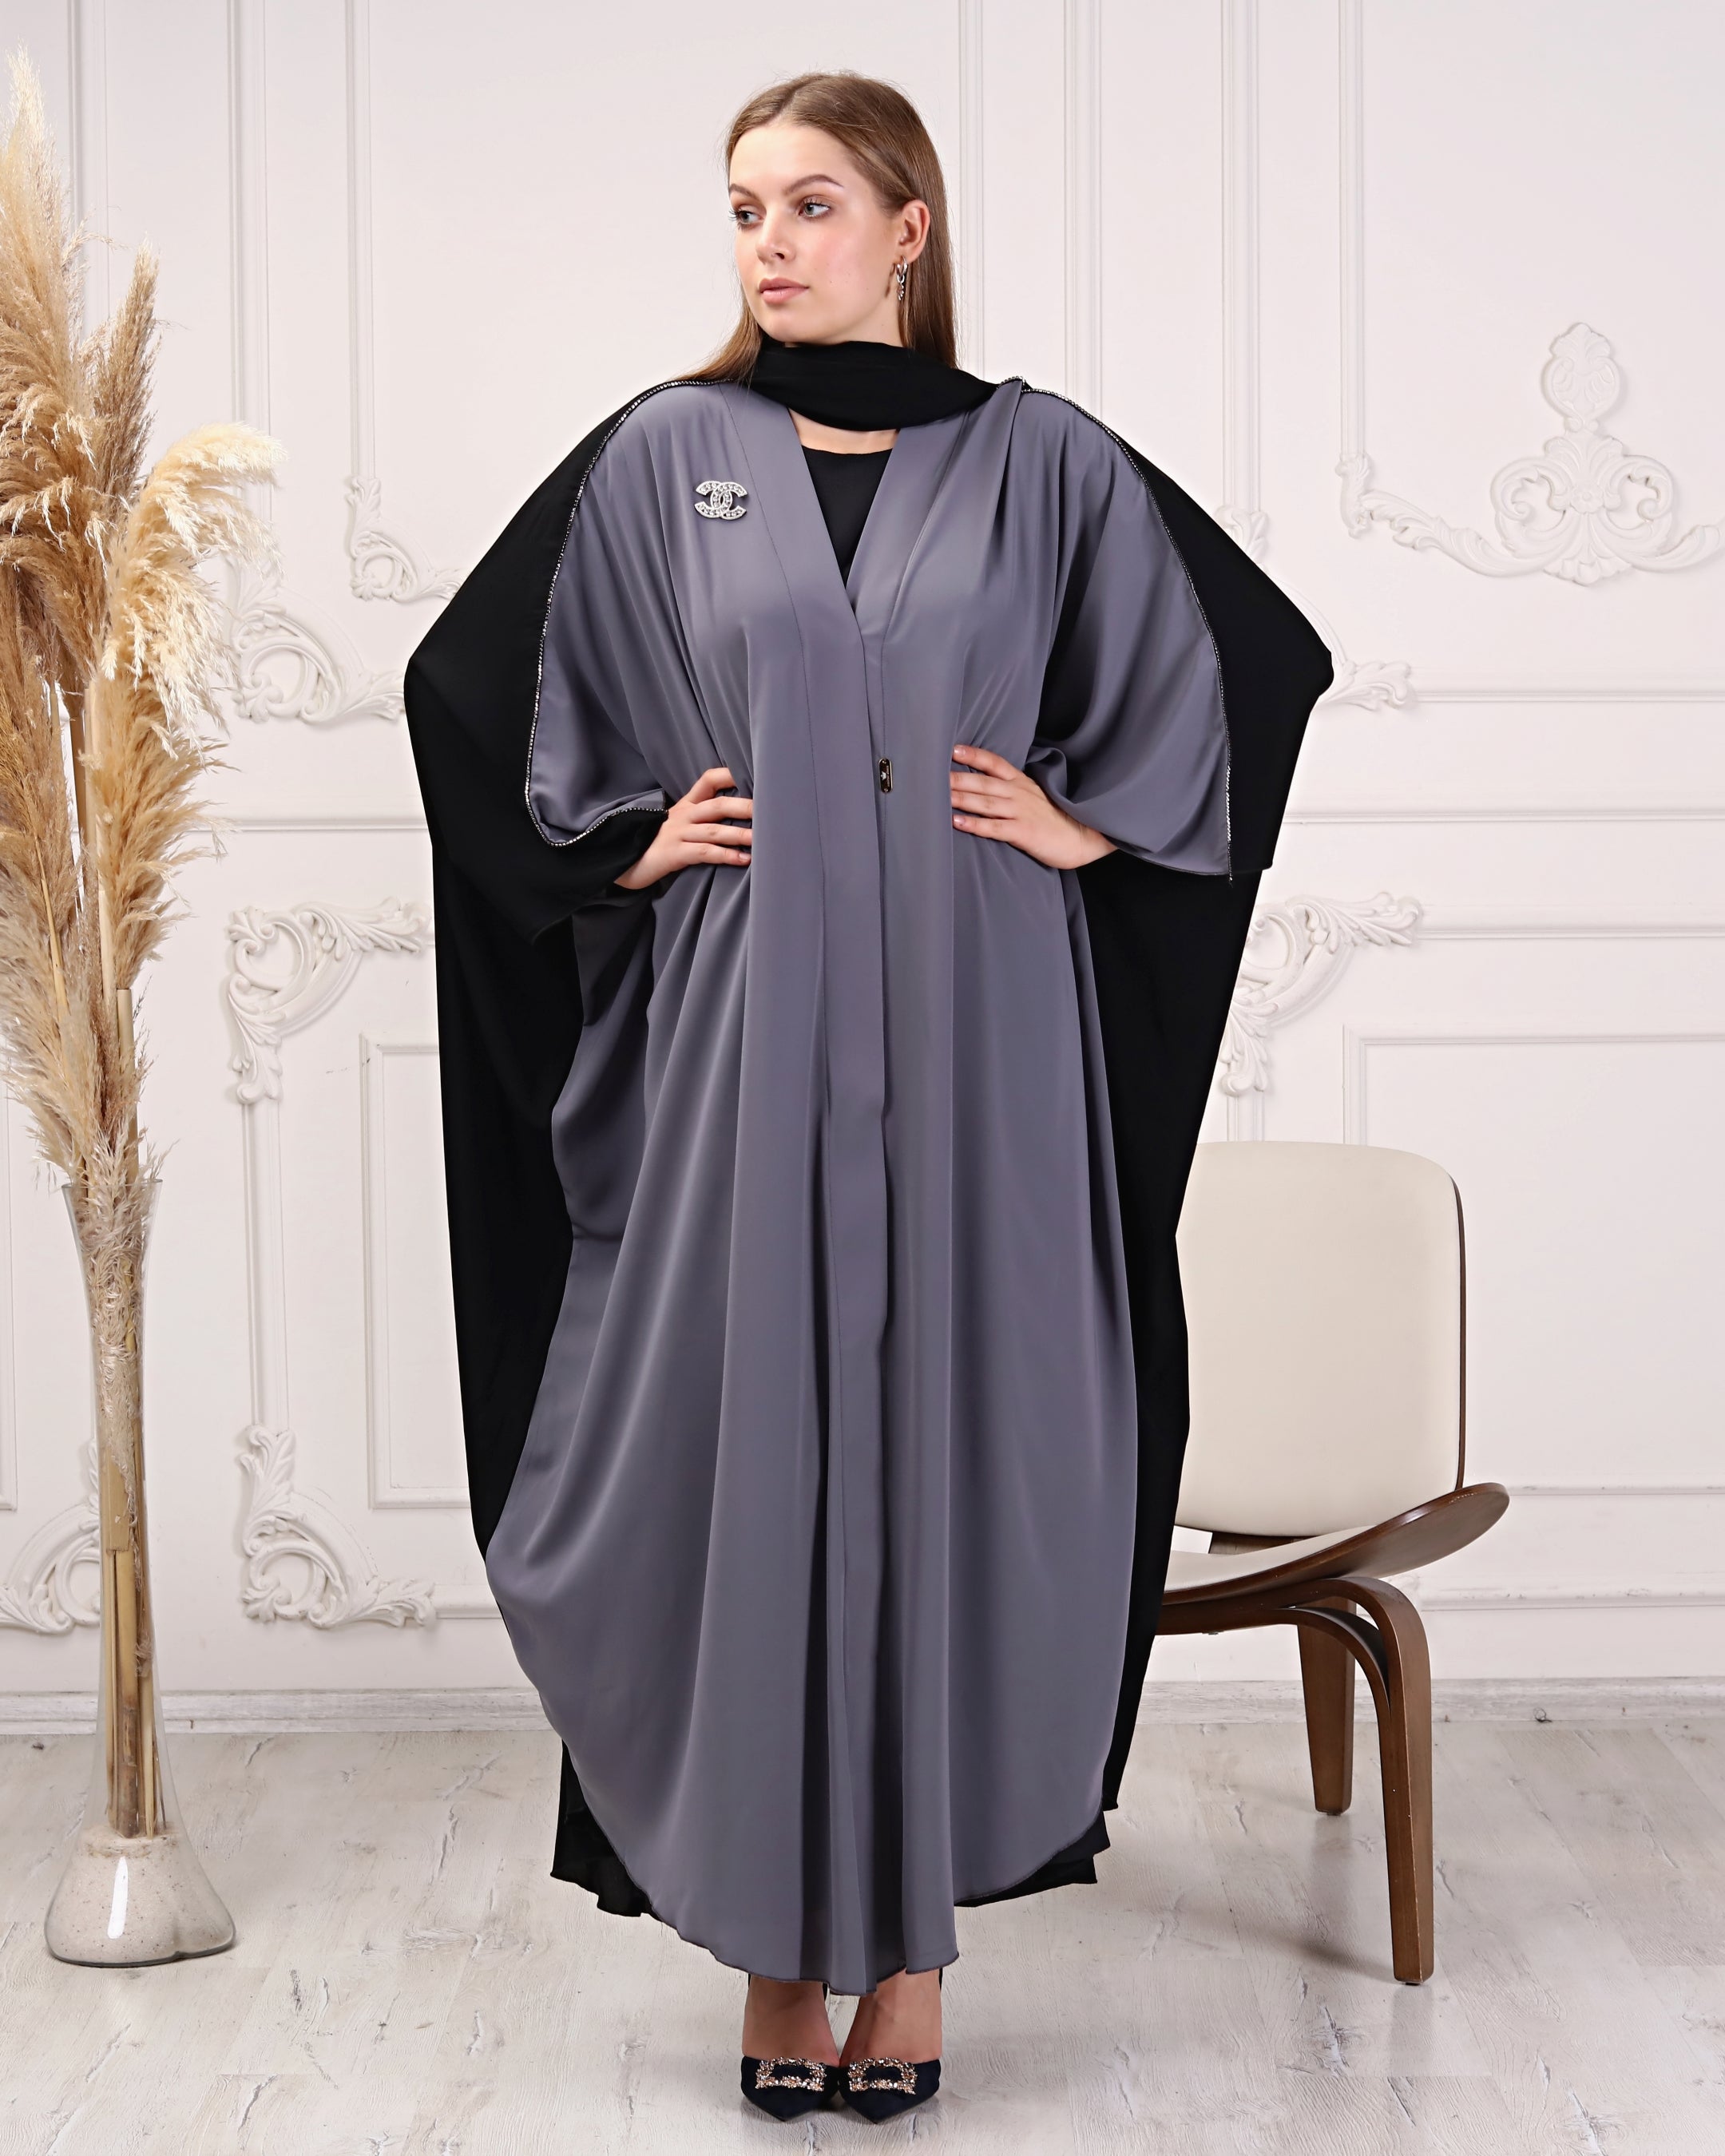 Baggy Beauty: Timeless Elegance in our Handcrafted Abaya